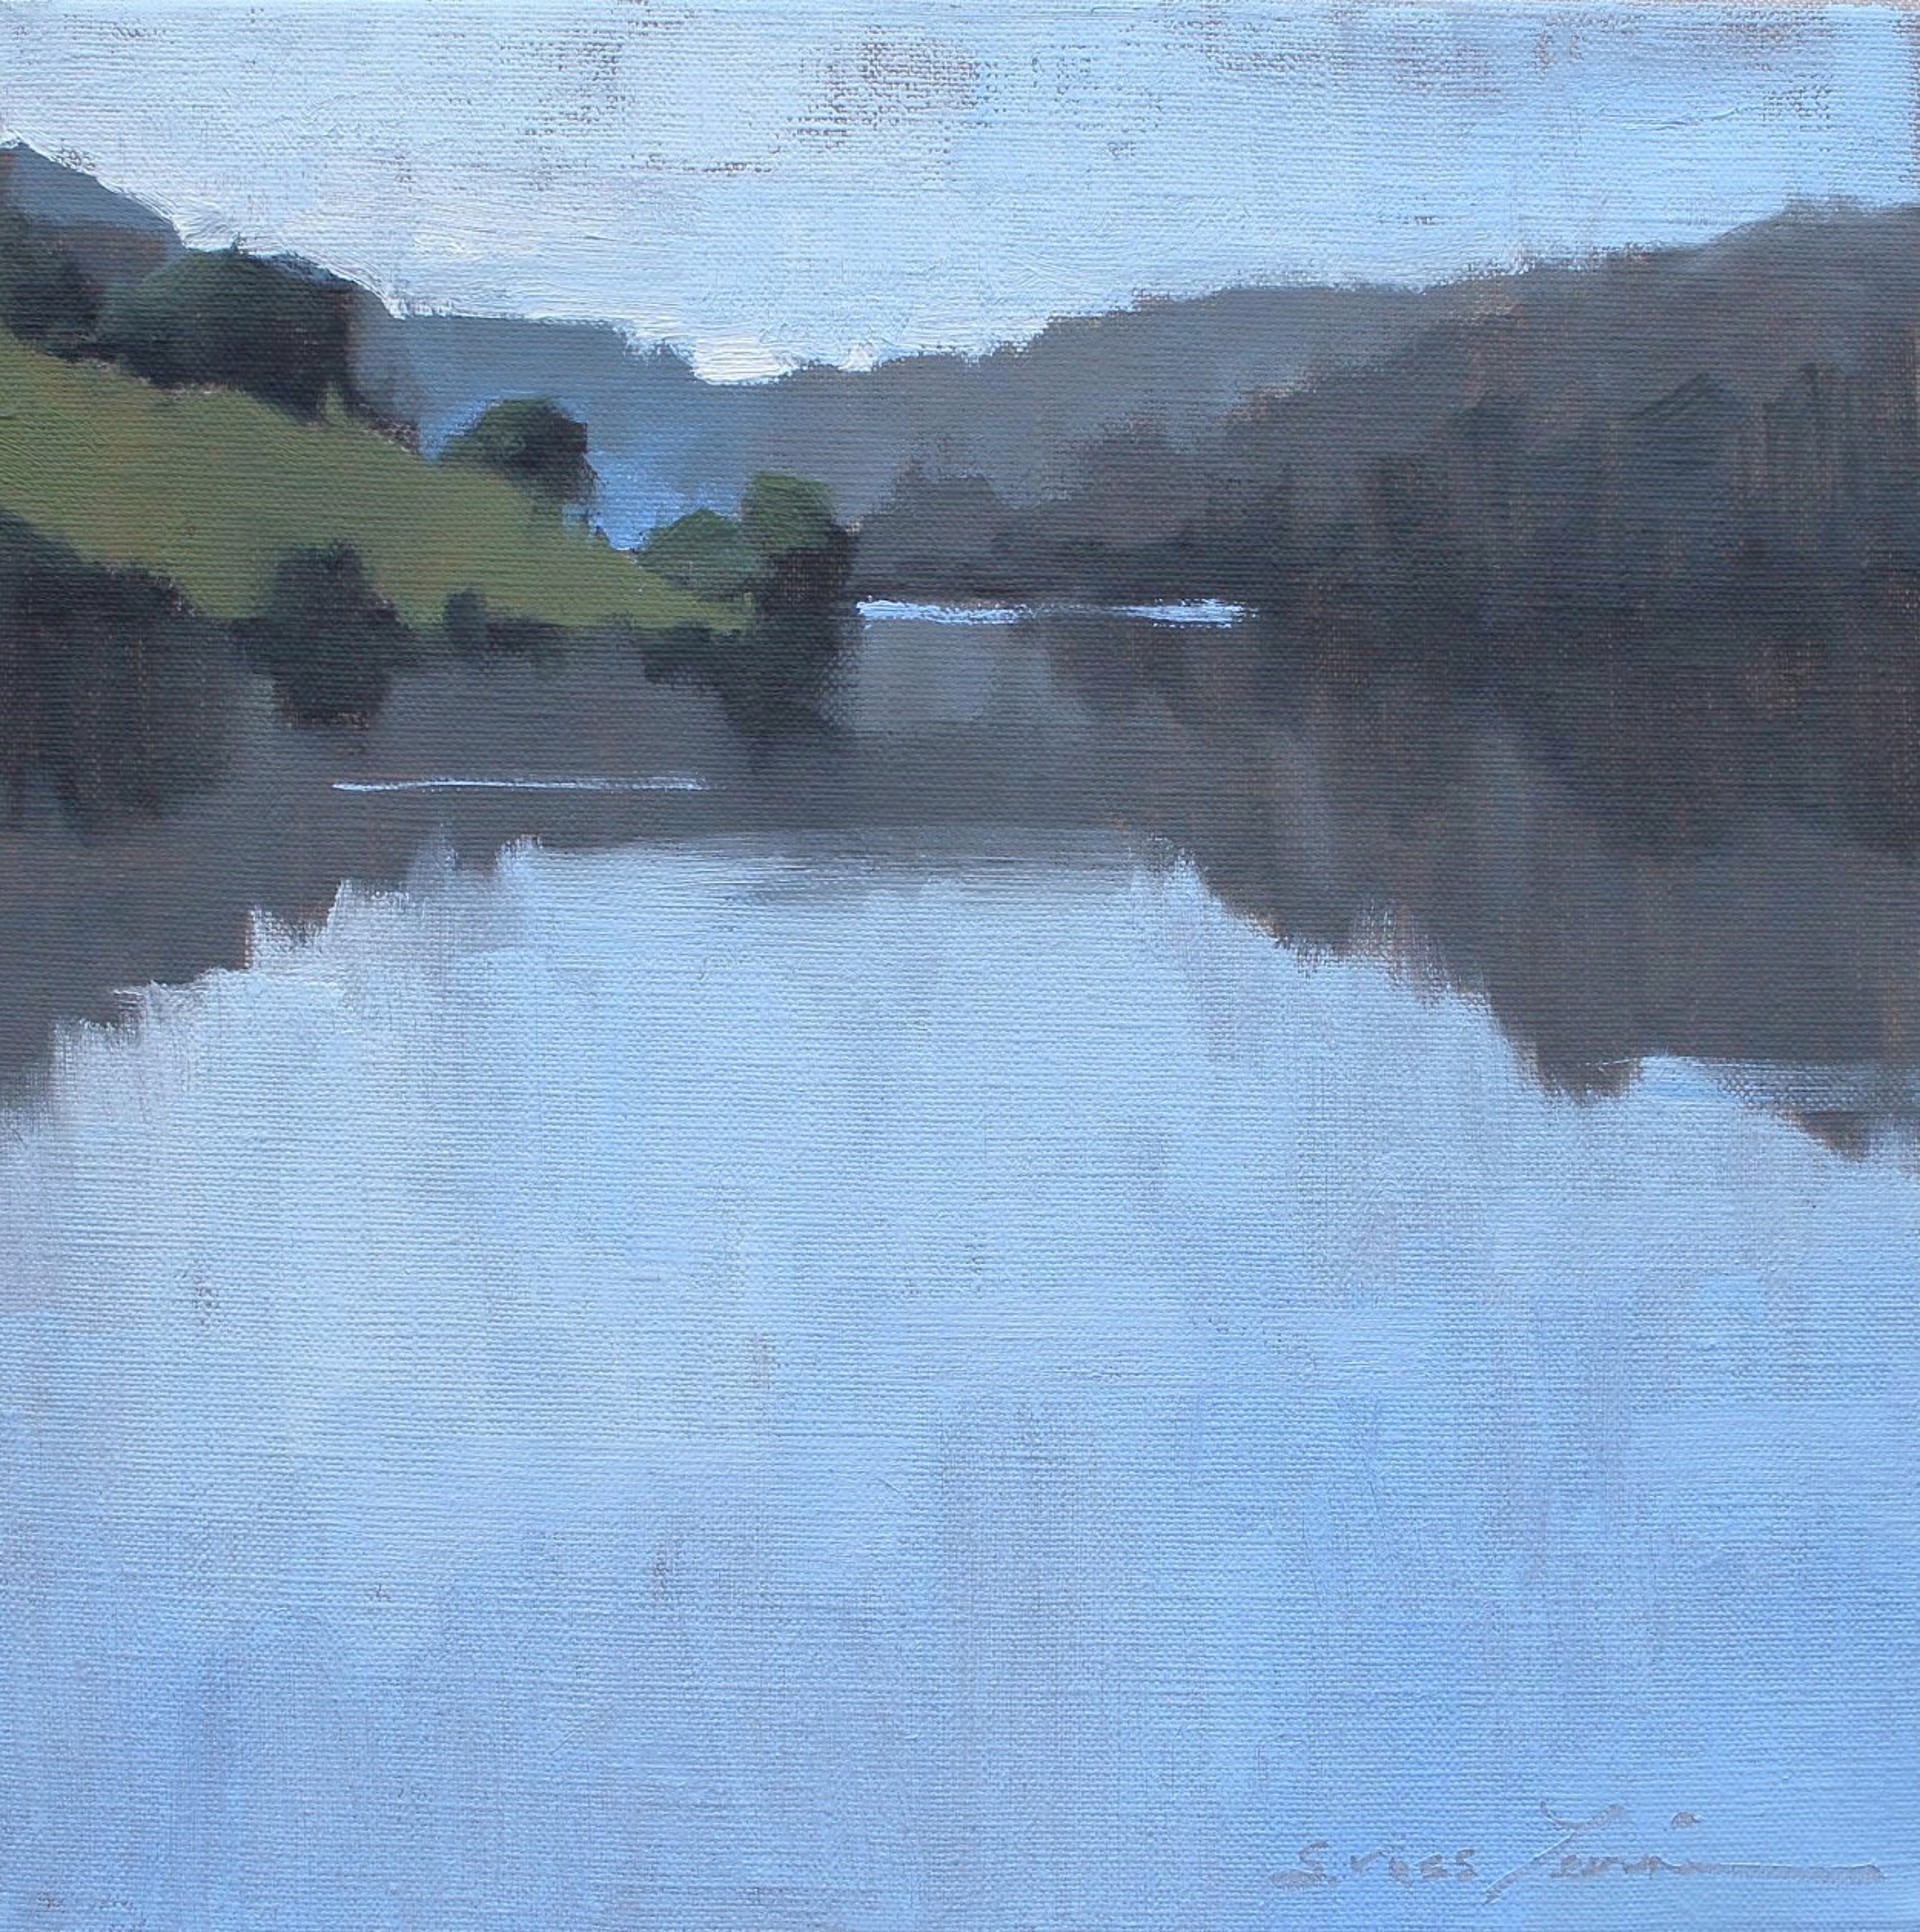 Calm Water by Sherrie Russ Levine